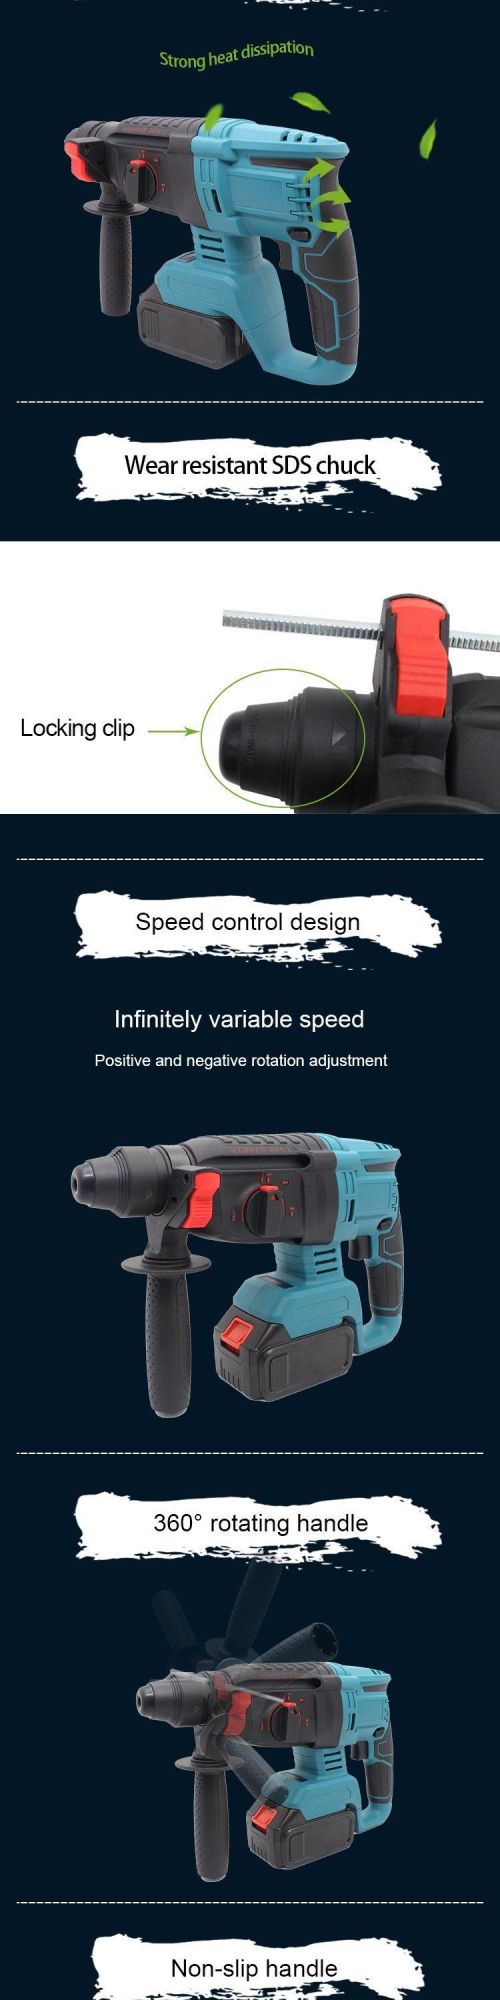 Gaide Power Hammer Customization Electric Cordless Rotary Hammer Experts